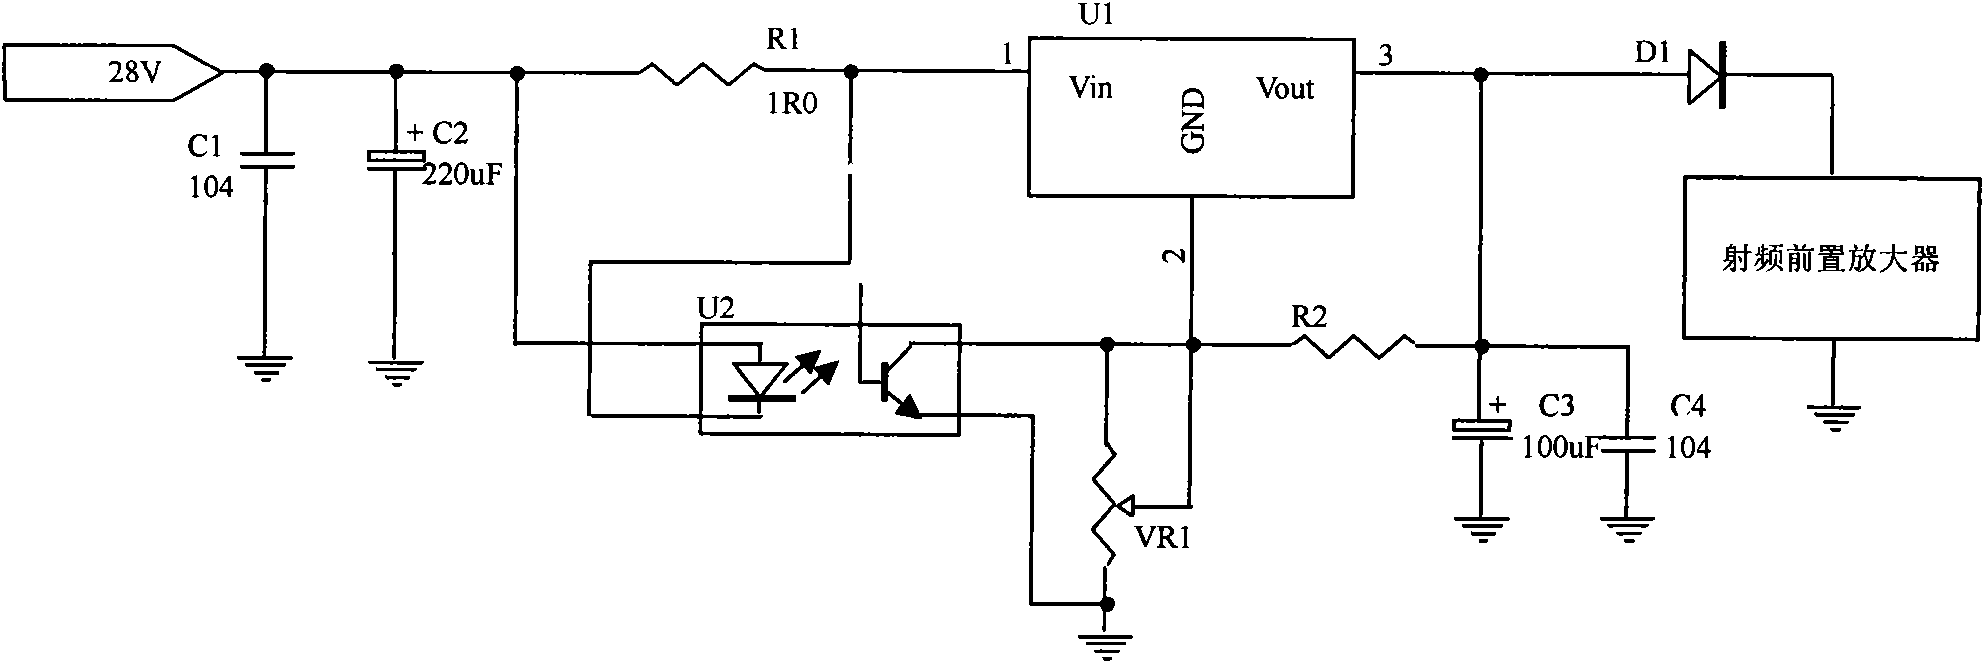 Current protection device of preamplifier